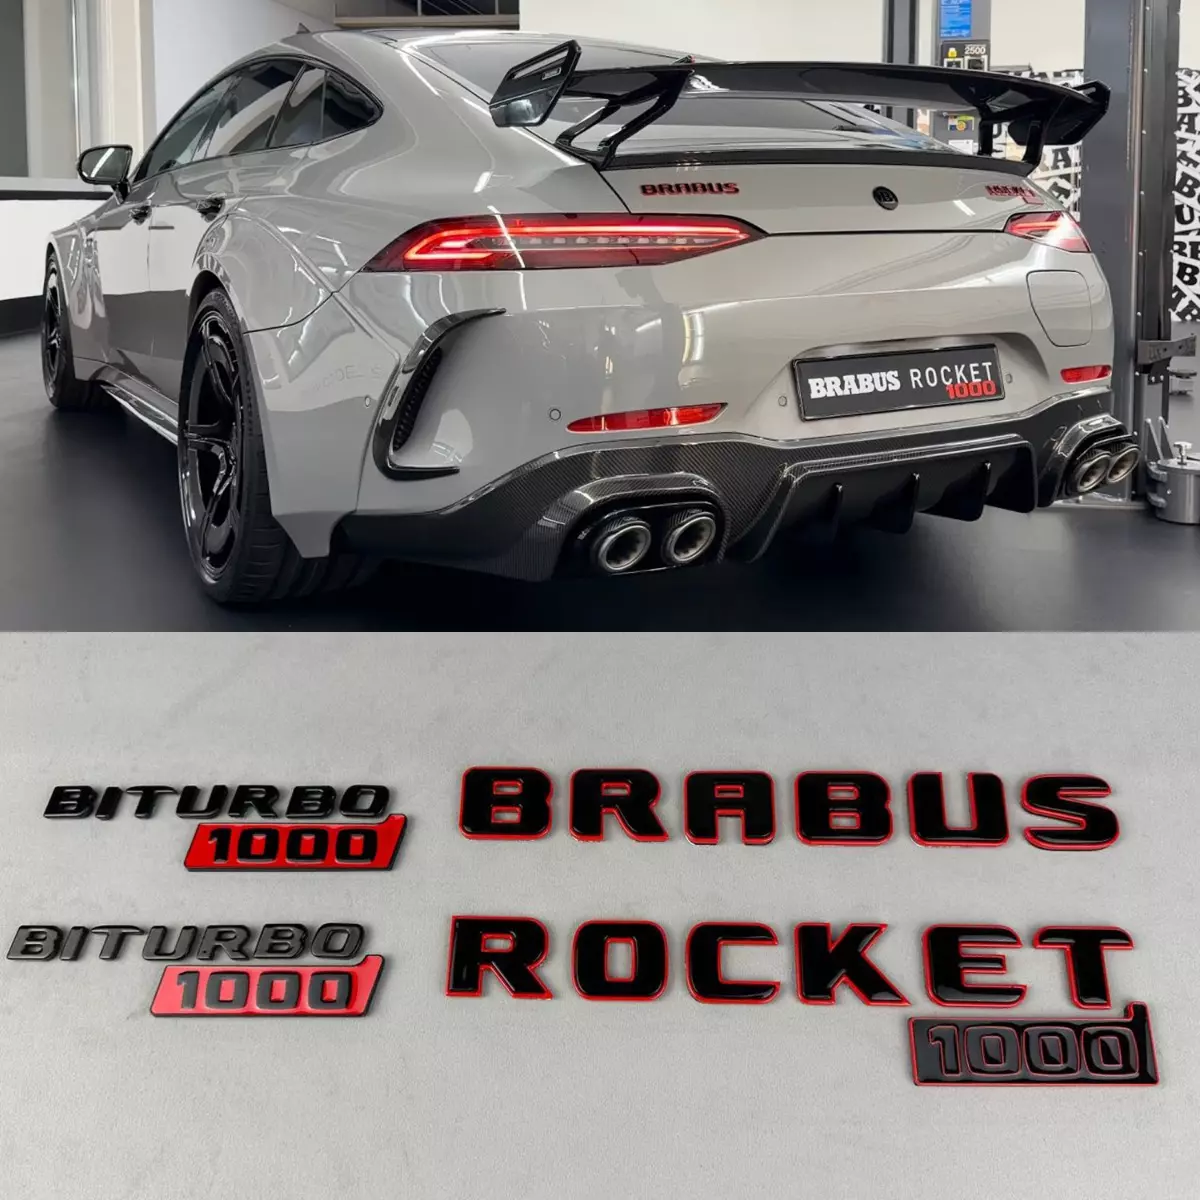 Tail and Fender Emblems Brabus Rocket 1000 “1 of 25” Biturbo 1000 Red and Black for Mercedes-Benz GT 2024